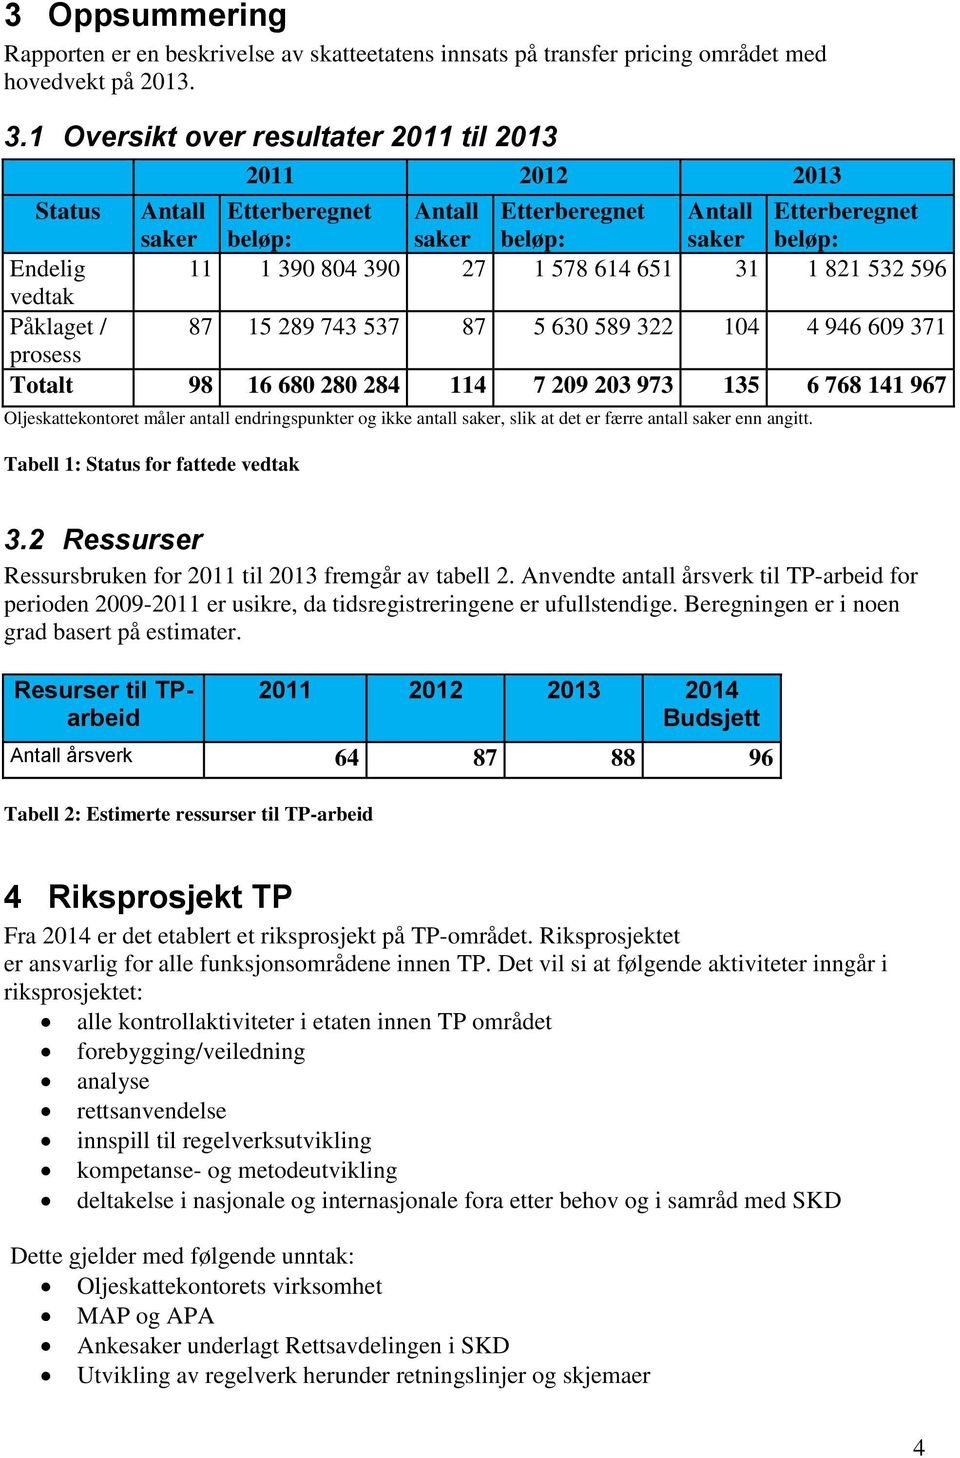 Tabell 1: Status for fattede vedtak 2011 2012 2013 Status Antall saker Etterberegnet beløp: Antall saker Etterberegnet beløp: Antall saker Etterberegnet beløp: Endelig 11 1 390 804 390 27 1 578 614